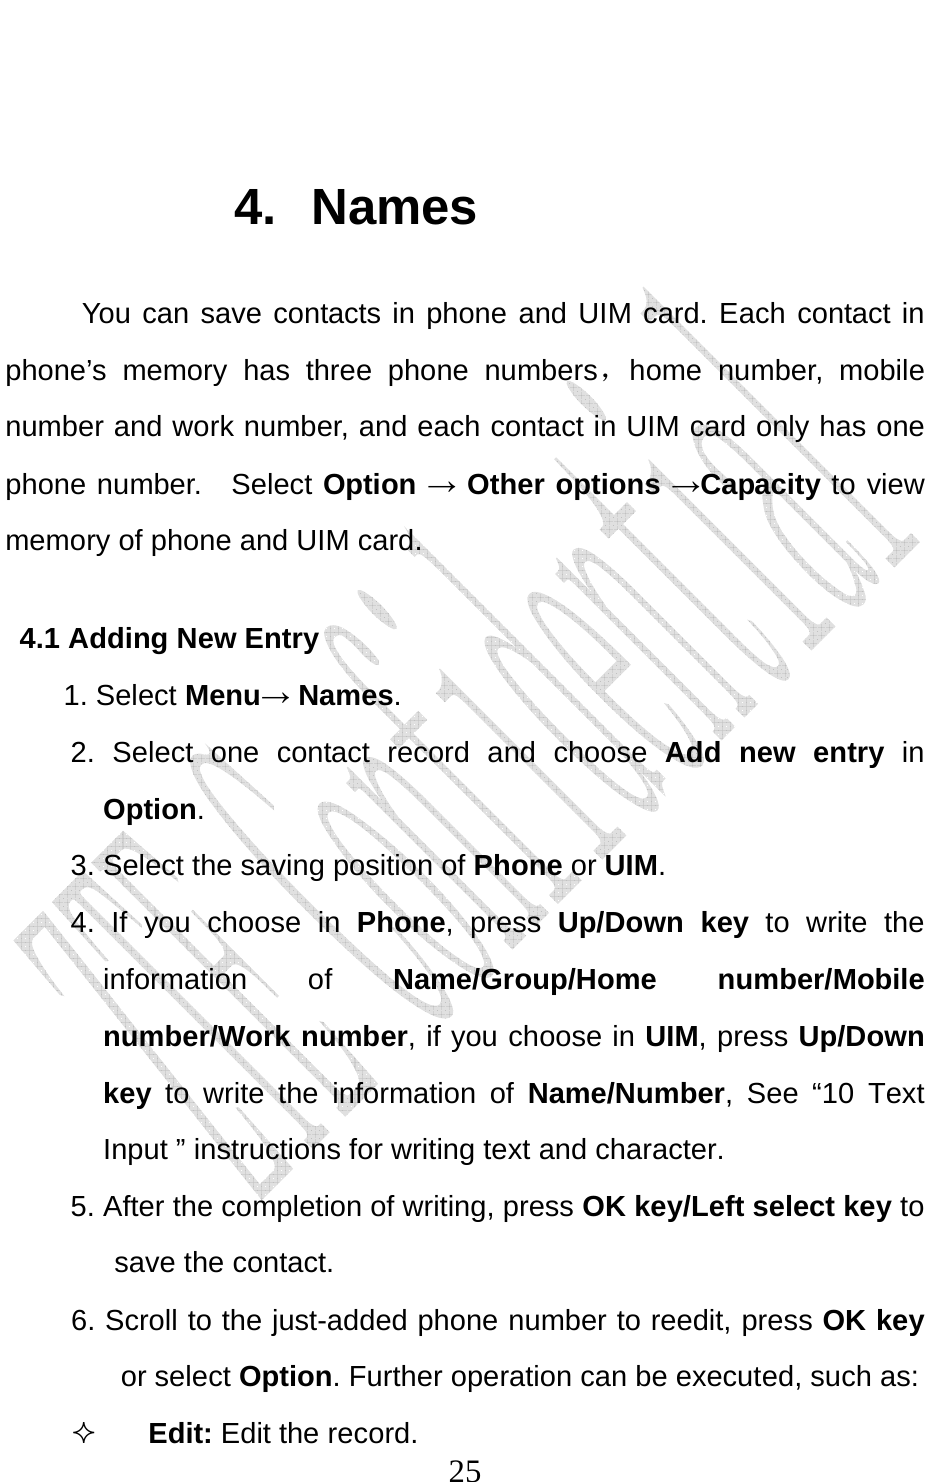                              25 4. Names You can save contacts in phone and UIM card. Each contact in phone’s memory has three phone numbers，home number, mobile number and work number, and each contact in UIM card only has one phone number.   Select Option → Other options →Capacity to view memory of phone and UIM card. 4.1 Adding New Entry 1. Select Menu→ Names. 2. Select one contact record and choose Add new entry in Option.  3. Select the saving position of Phone or UIM. 4. If you choose in Phone, press Up/Down key to write the information of Name/Group/Home number/Mobile number/Work number, if you choose in UIM, press Up/Down key  to write the information of Name/Number, See “10 Text Input ” instructions for writing text and character. 5. After the completion of writing, press OK key/Left select key to save the contact. 6. Scroll to the just-added phone number to reedit, press OK key or select Option. Further operation can be executed, such as:  Edit: Edit the record. 